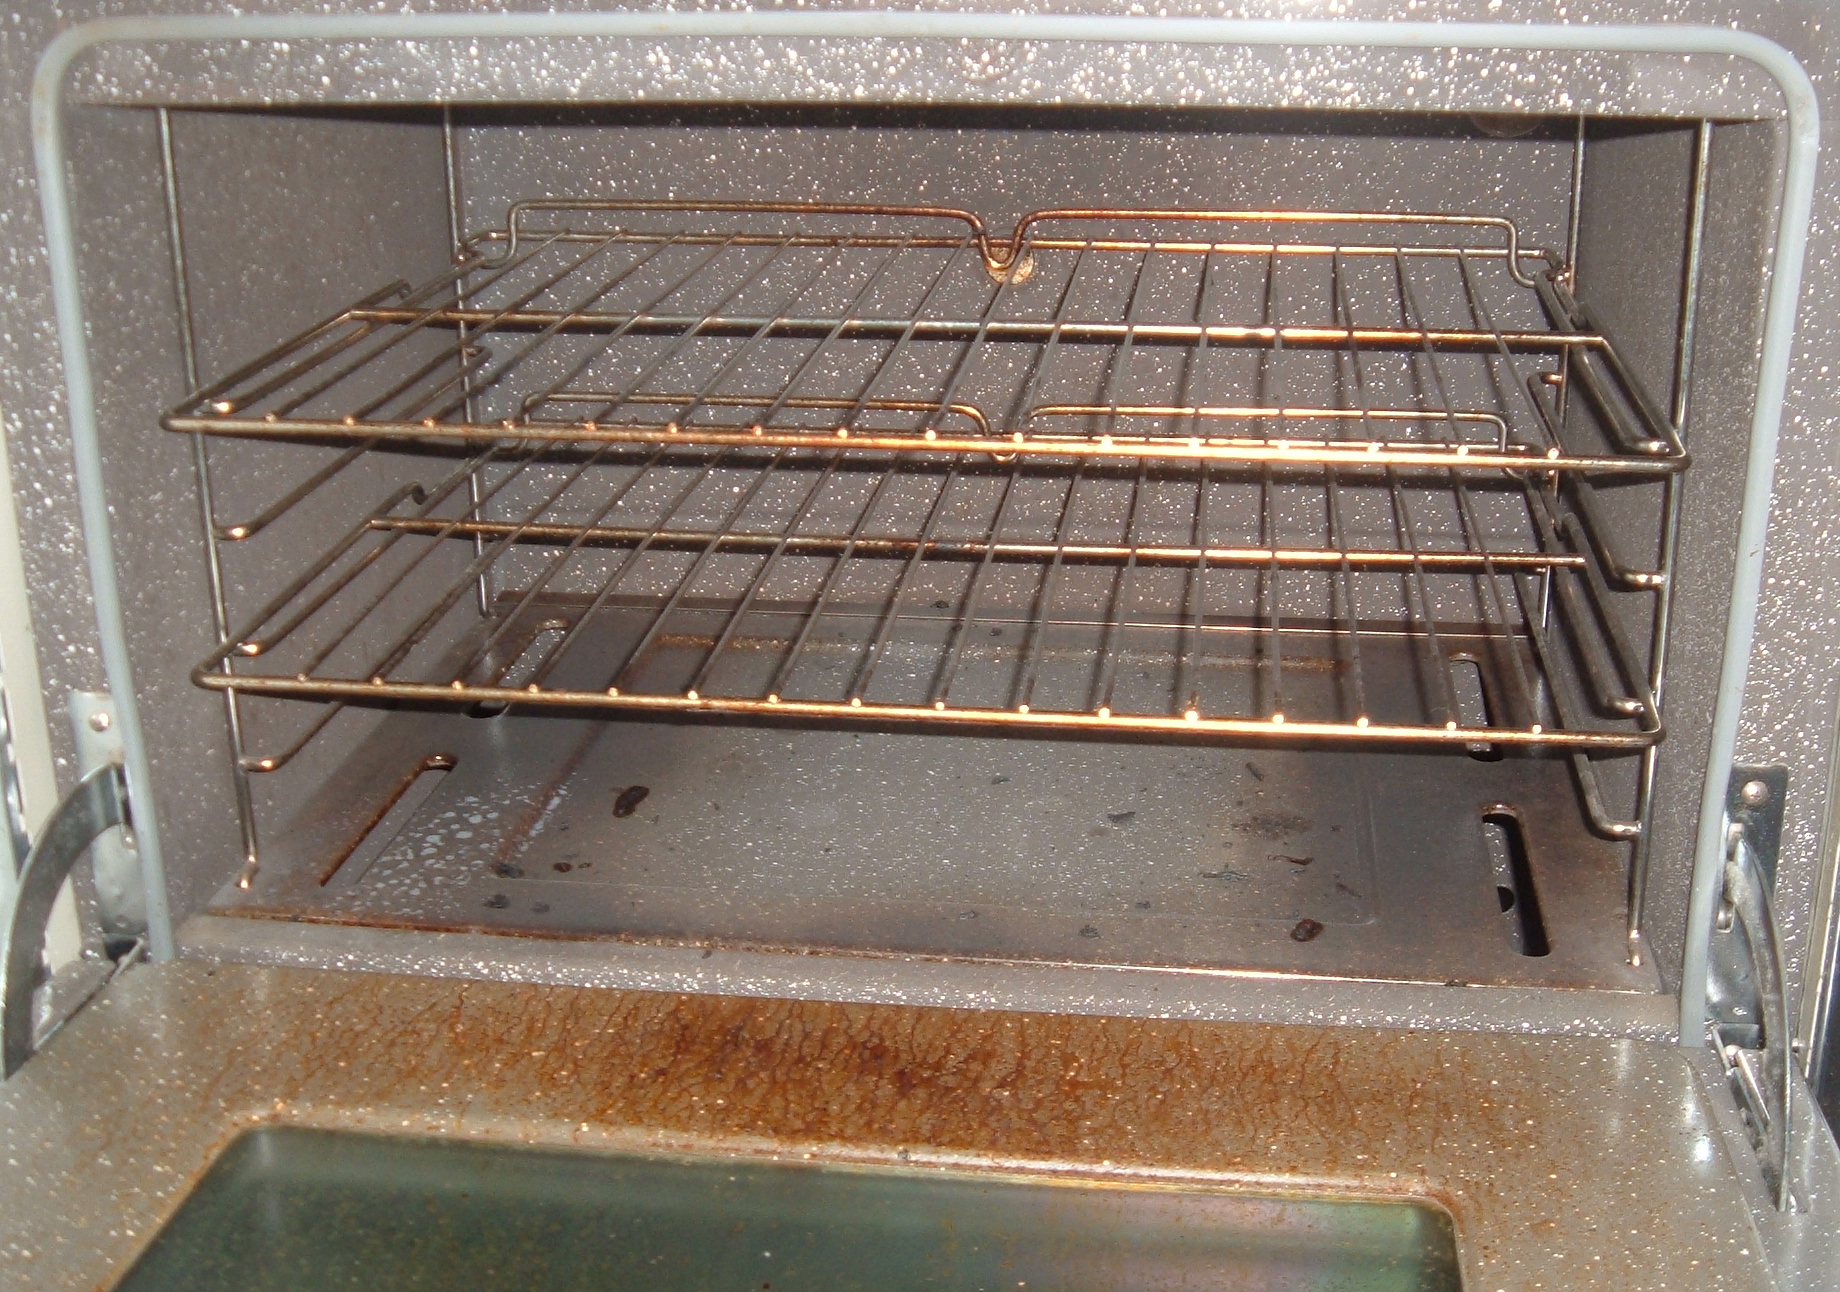 How to Clean Your Oven with Baking Soda